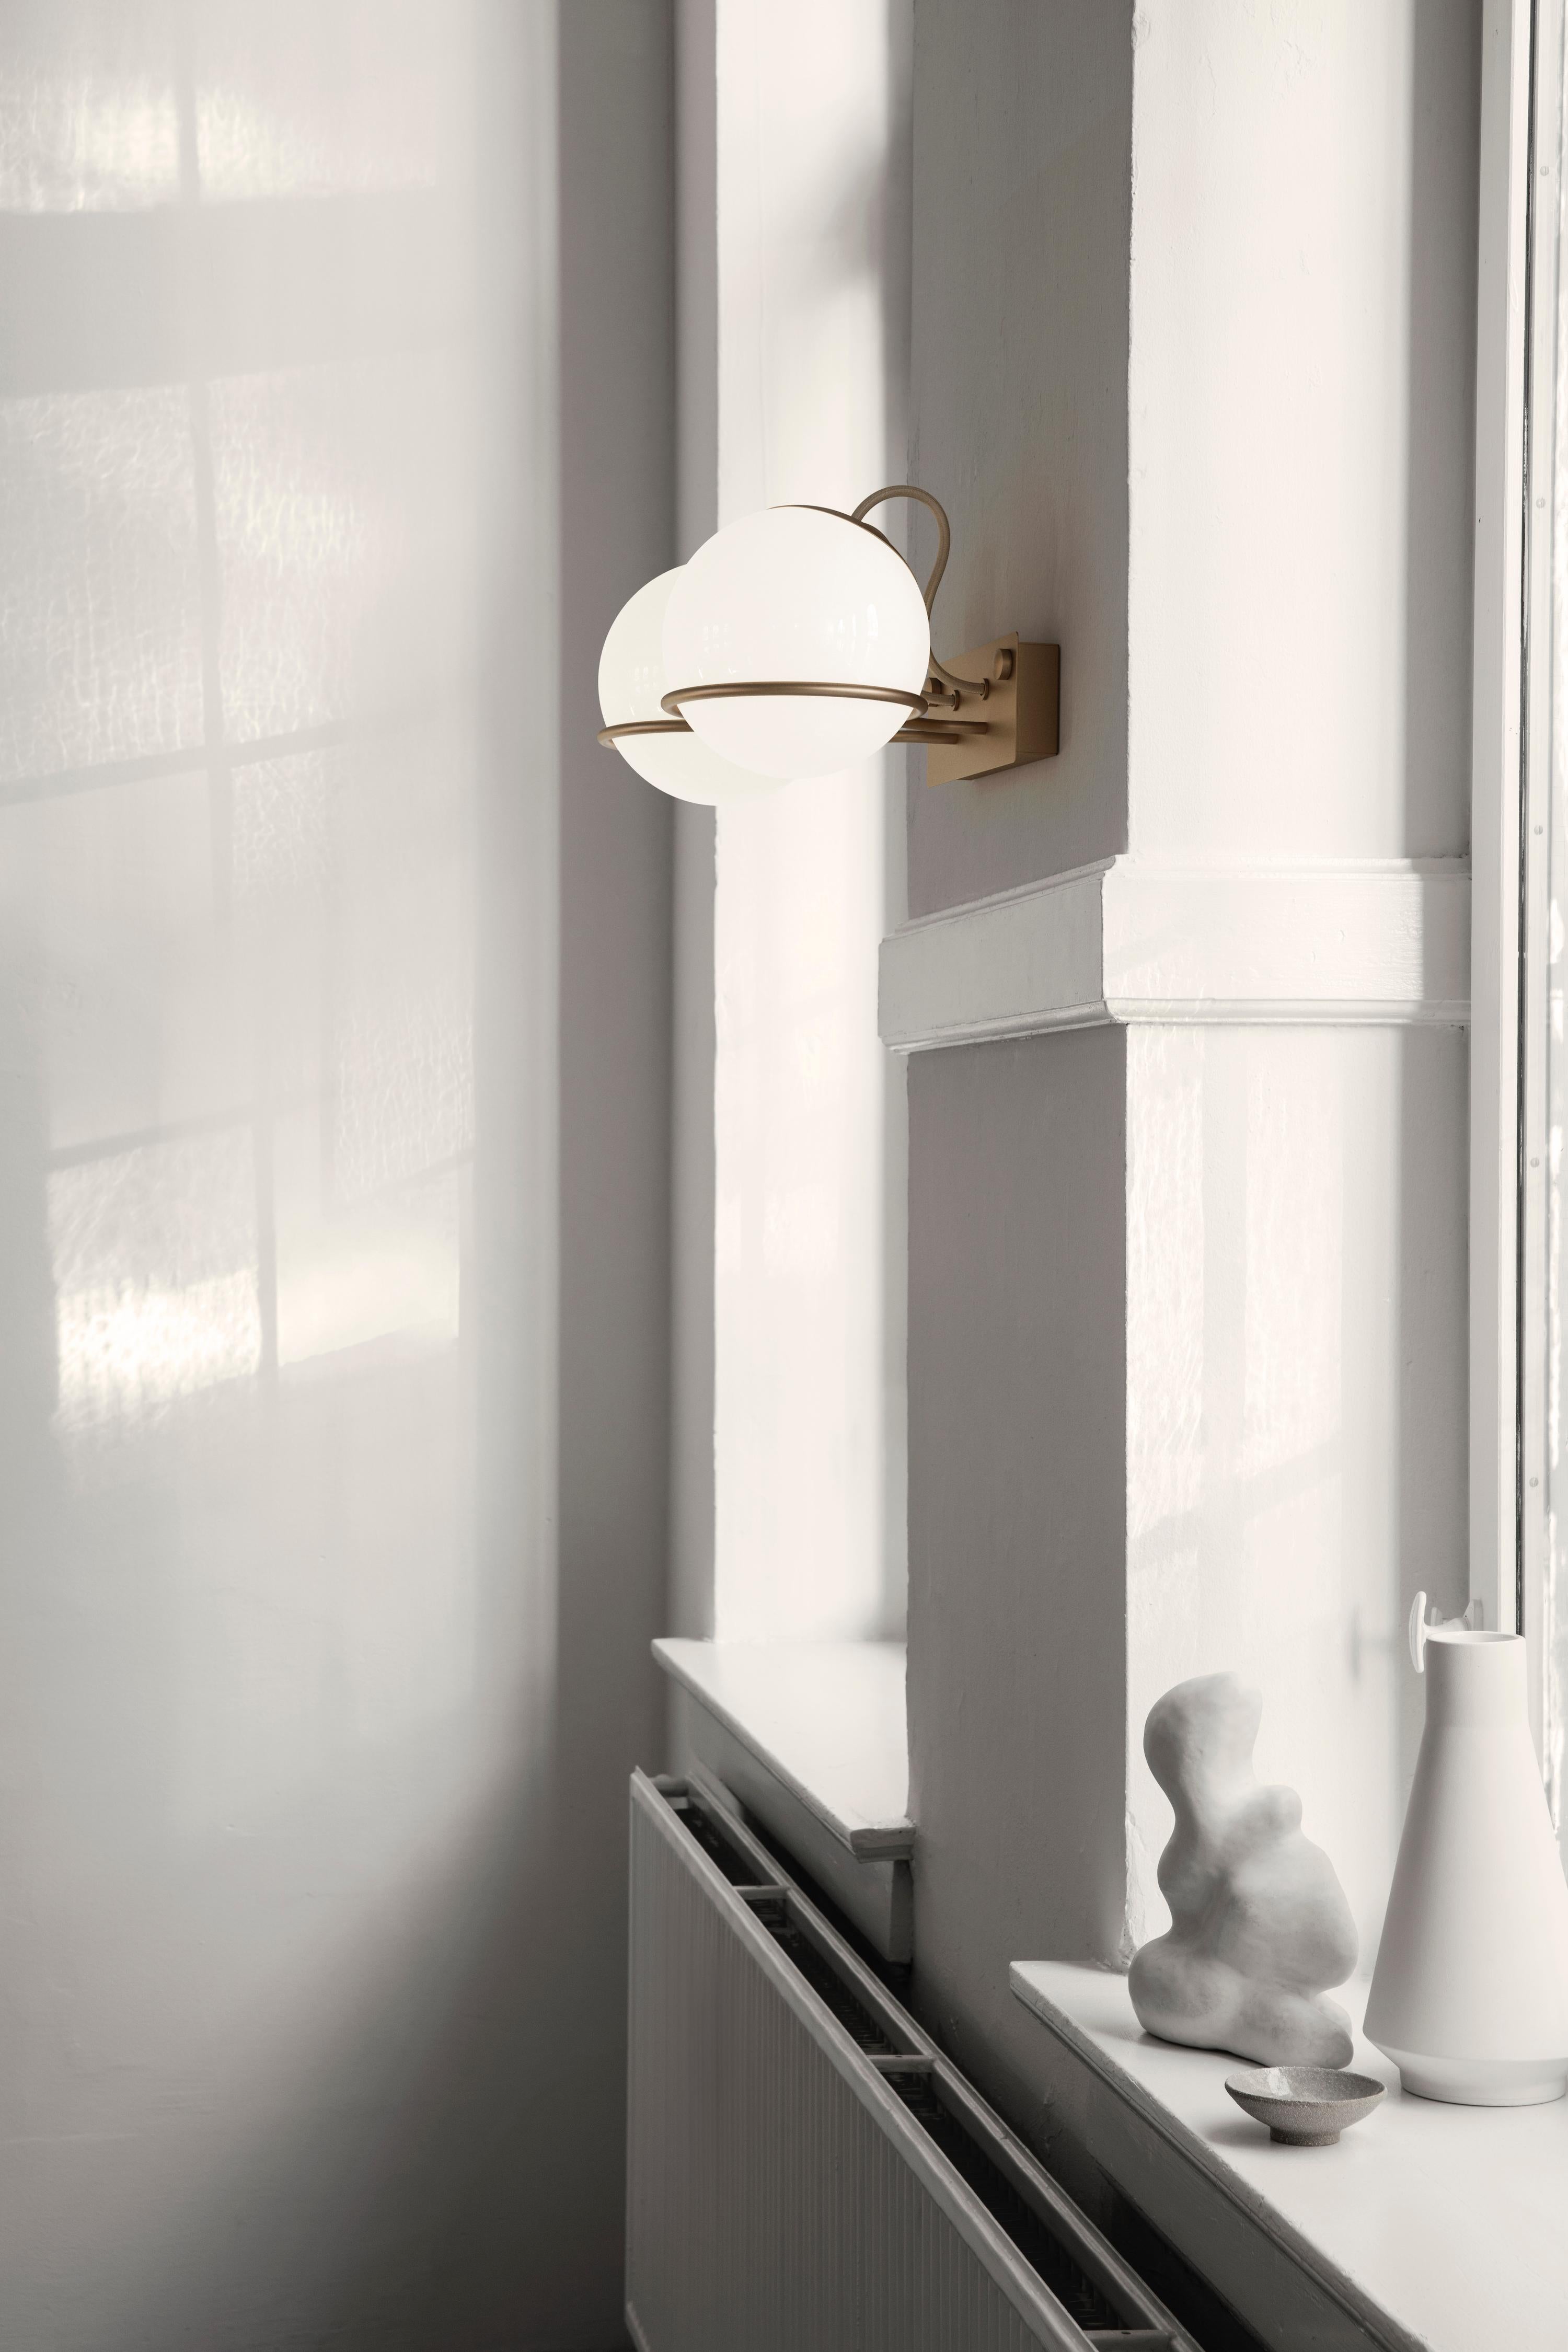 Gino Sarfatti Model 238/2 wall lamp in champagne for Astep. 

Designed in 1959, this is an authorized Astep/Flos re-edition by Alessandro Sarfatti, grandson of Gino Sarfatti, who applies his grandfather's scrupulous attention to detail and materials